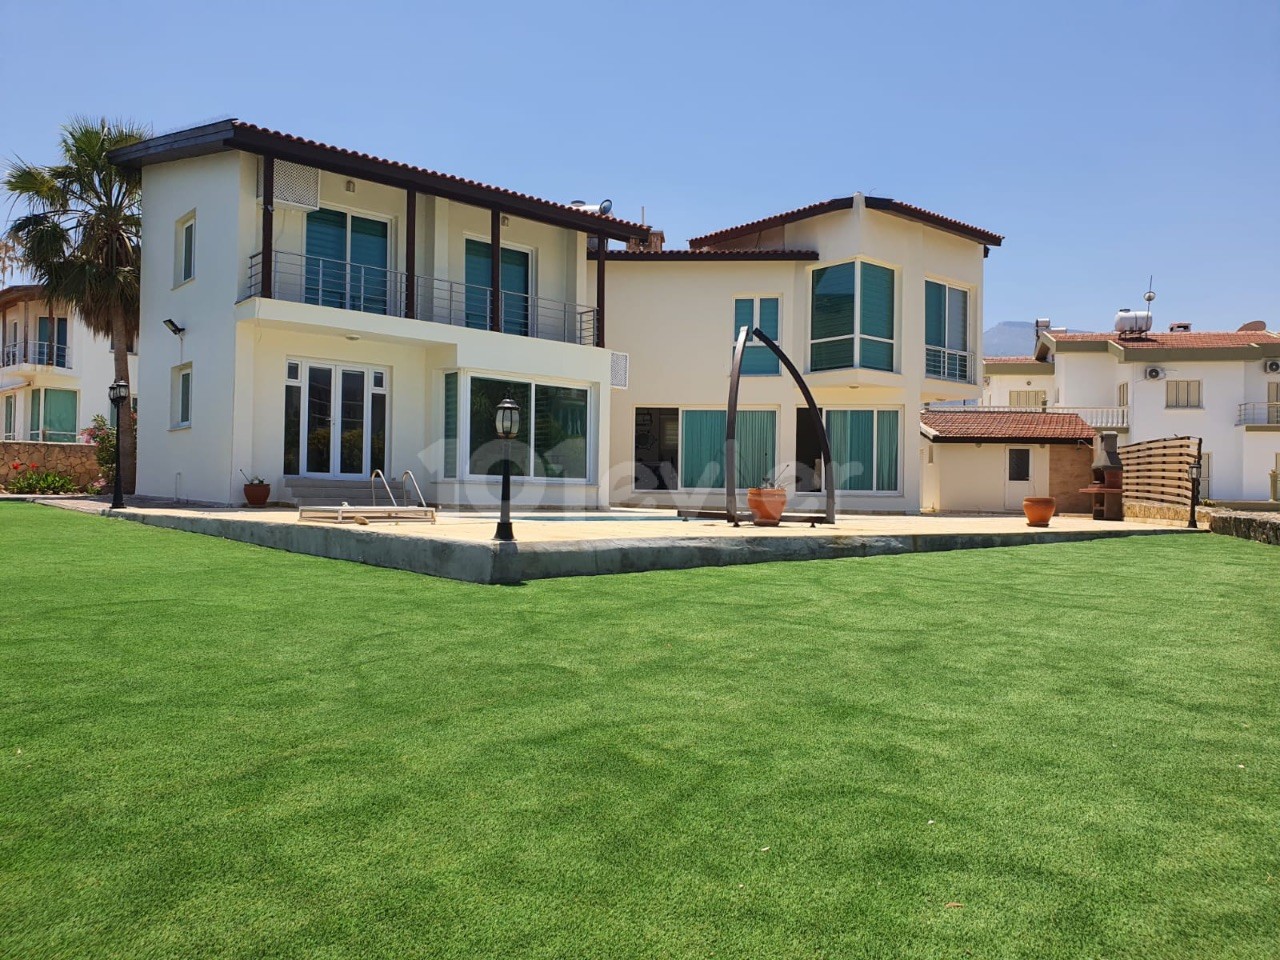 Villa For Sale in Çatalköy, Kyrenia | 15 meters from the sea|1300 m2 Well-kept Garden|Private Pool ** 